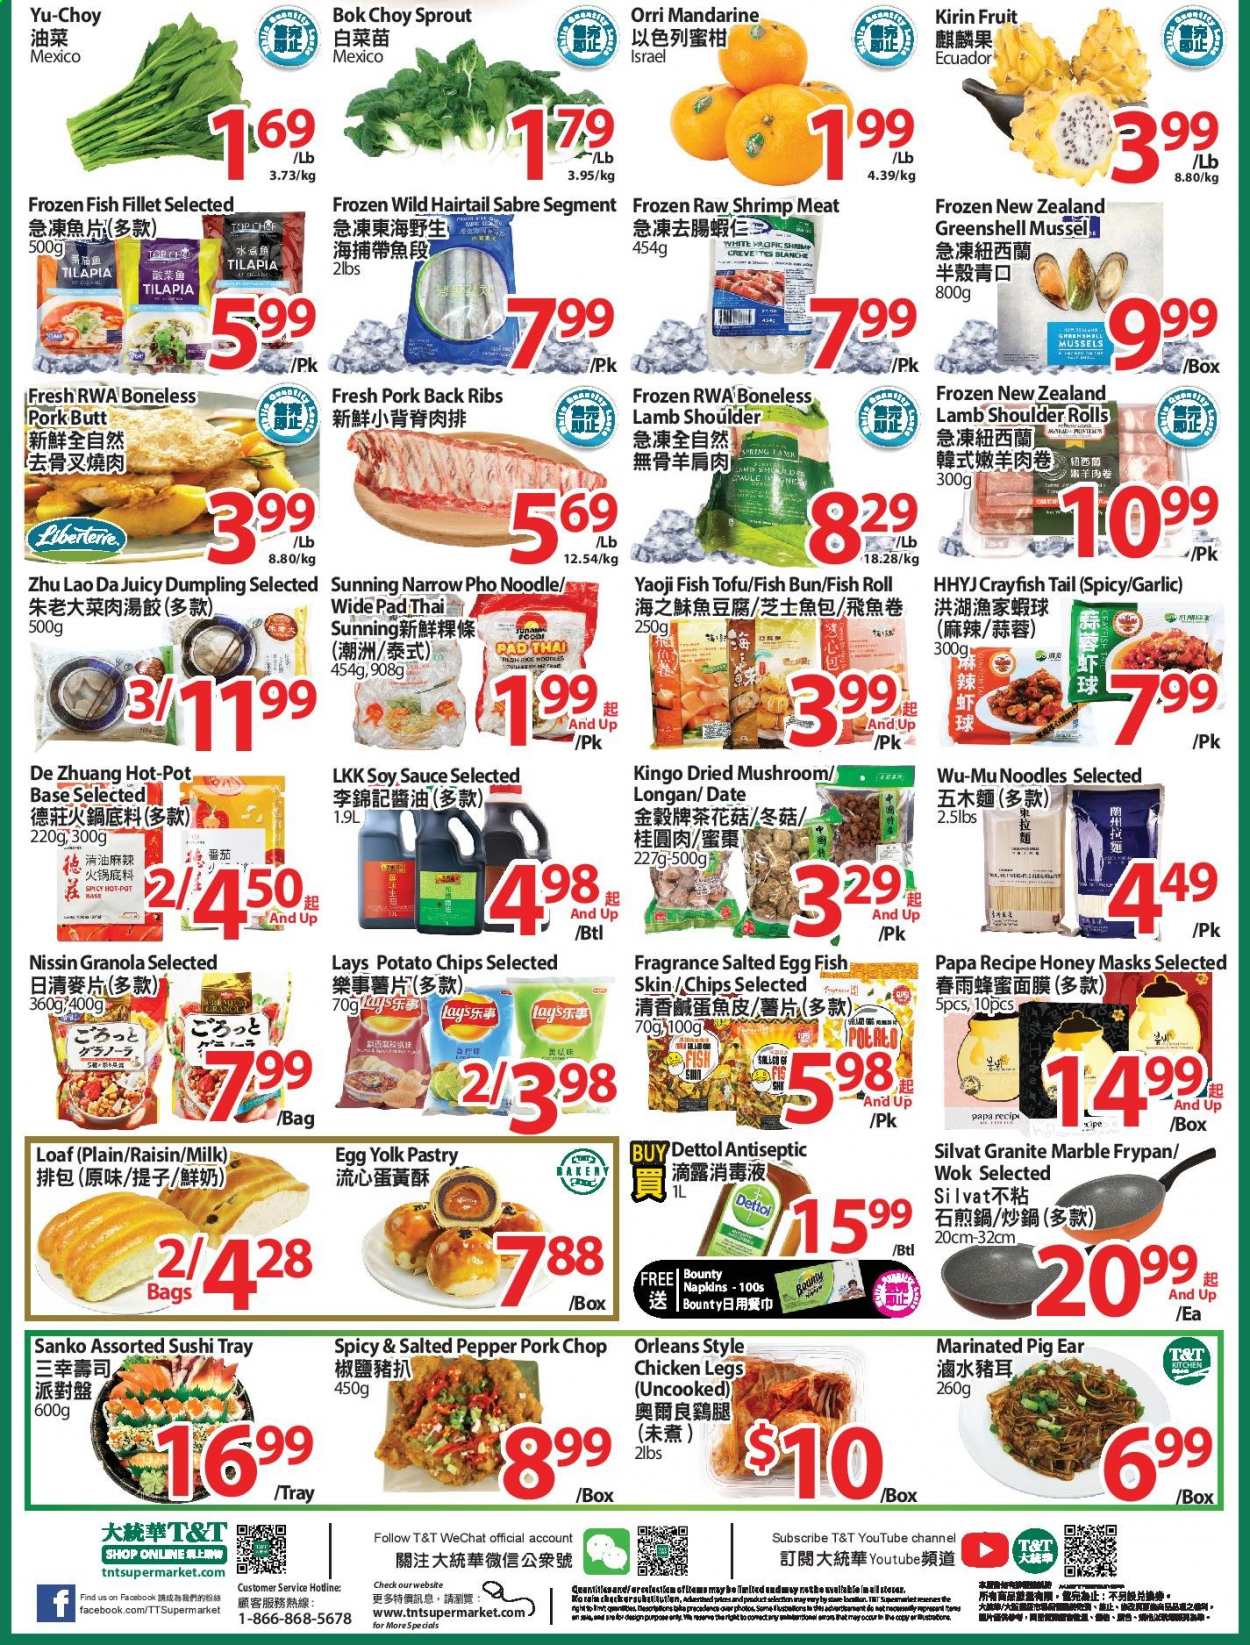 thumbnail - T&T Supermarket Flyer - March 19, 2021 - March 25, 2021 - Sales products - garlic, fish fillets, mussels, tilapia, fish, shrimps, sauce, dumplings, noodles, Nissin, milk, Bounty, potato chips, Lay’s, salted egg, rice vermicelli, soy sauce, honey, chicken legs, chicken, pork chops, pork meat, pork ribs, pork back ribs, lamb meat, lamb shoulder, napkins, fragrance, tray, pot, pan, wok, frying pan, pin, granola, Dettol. Page 2.